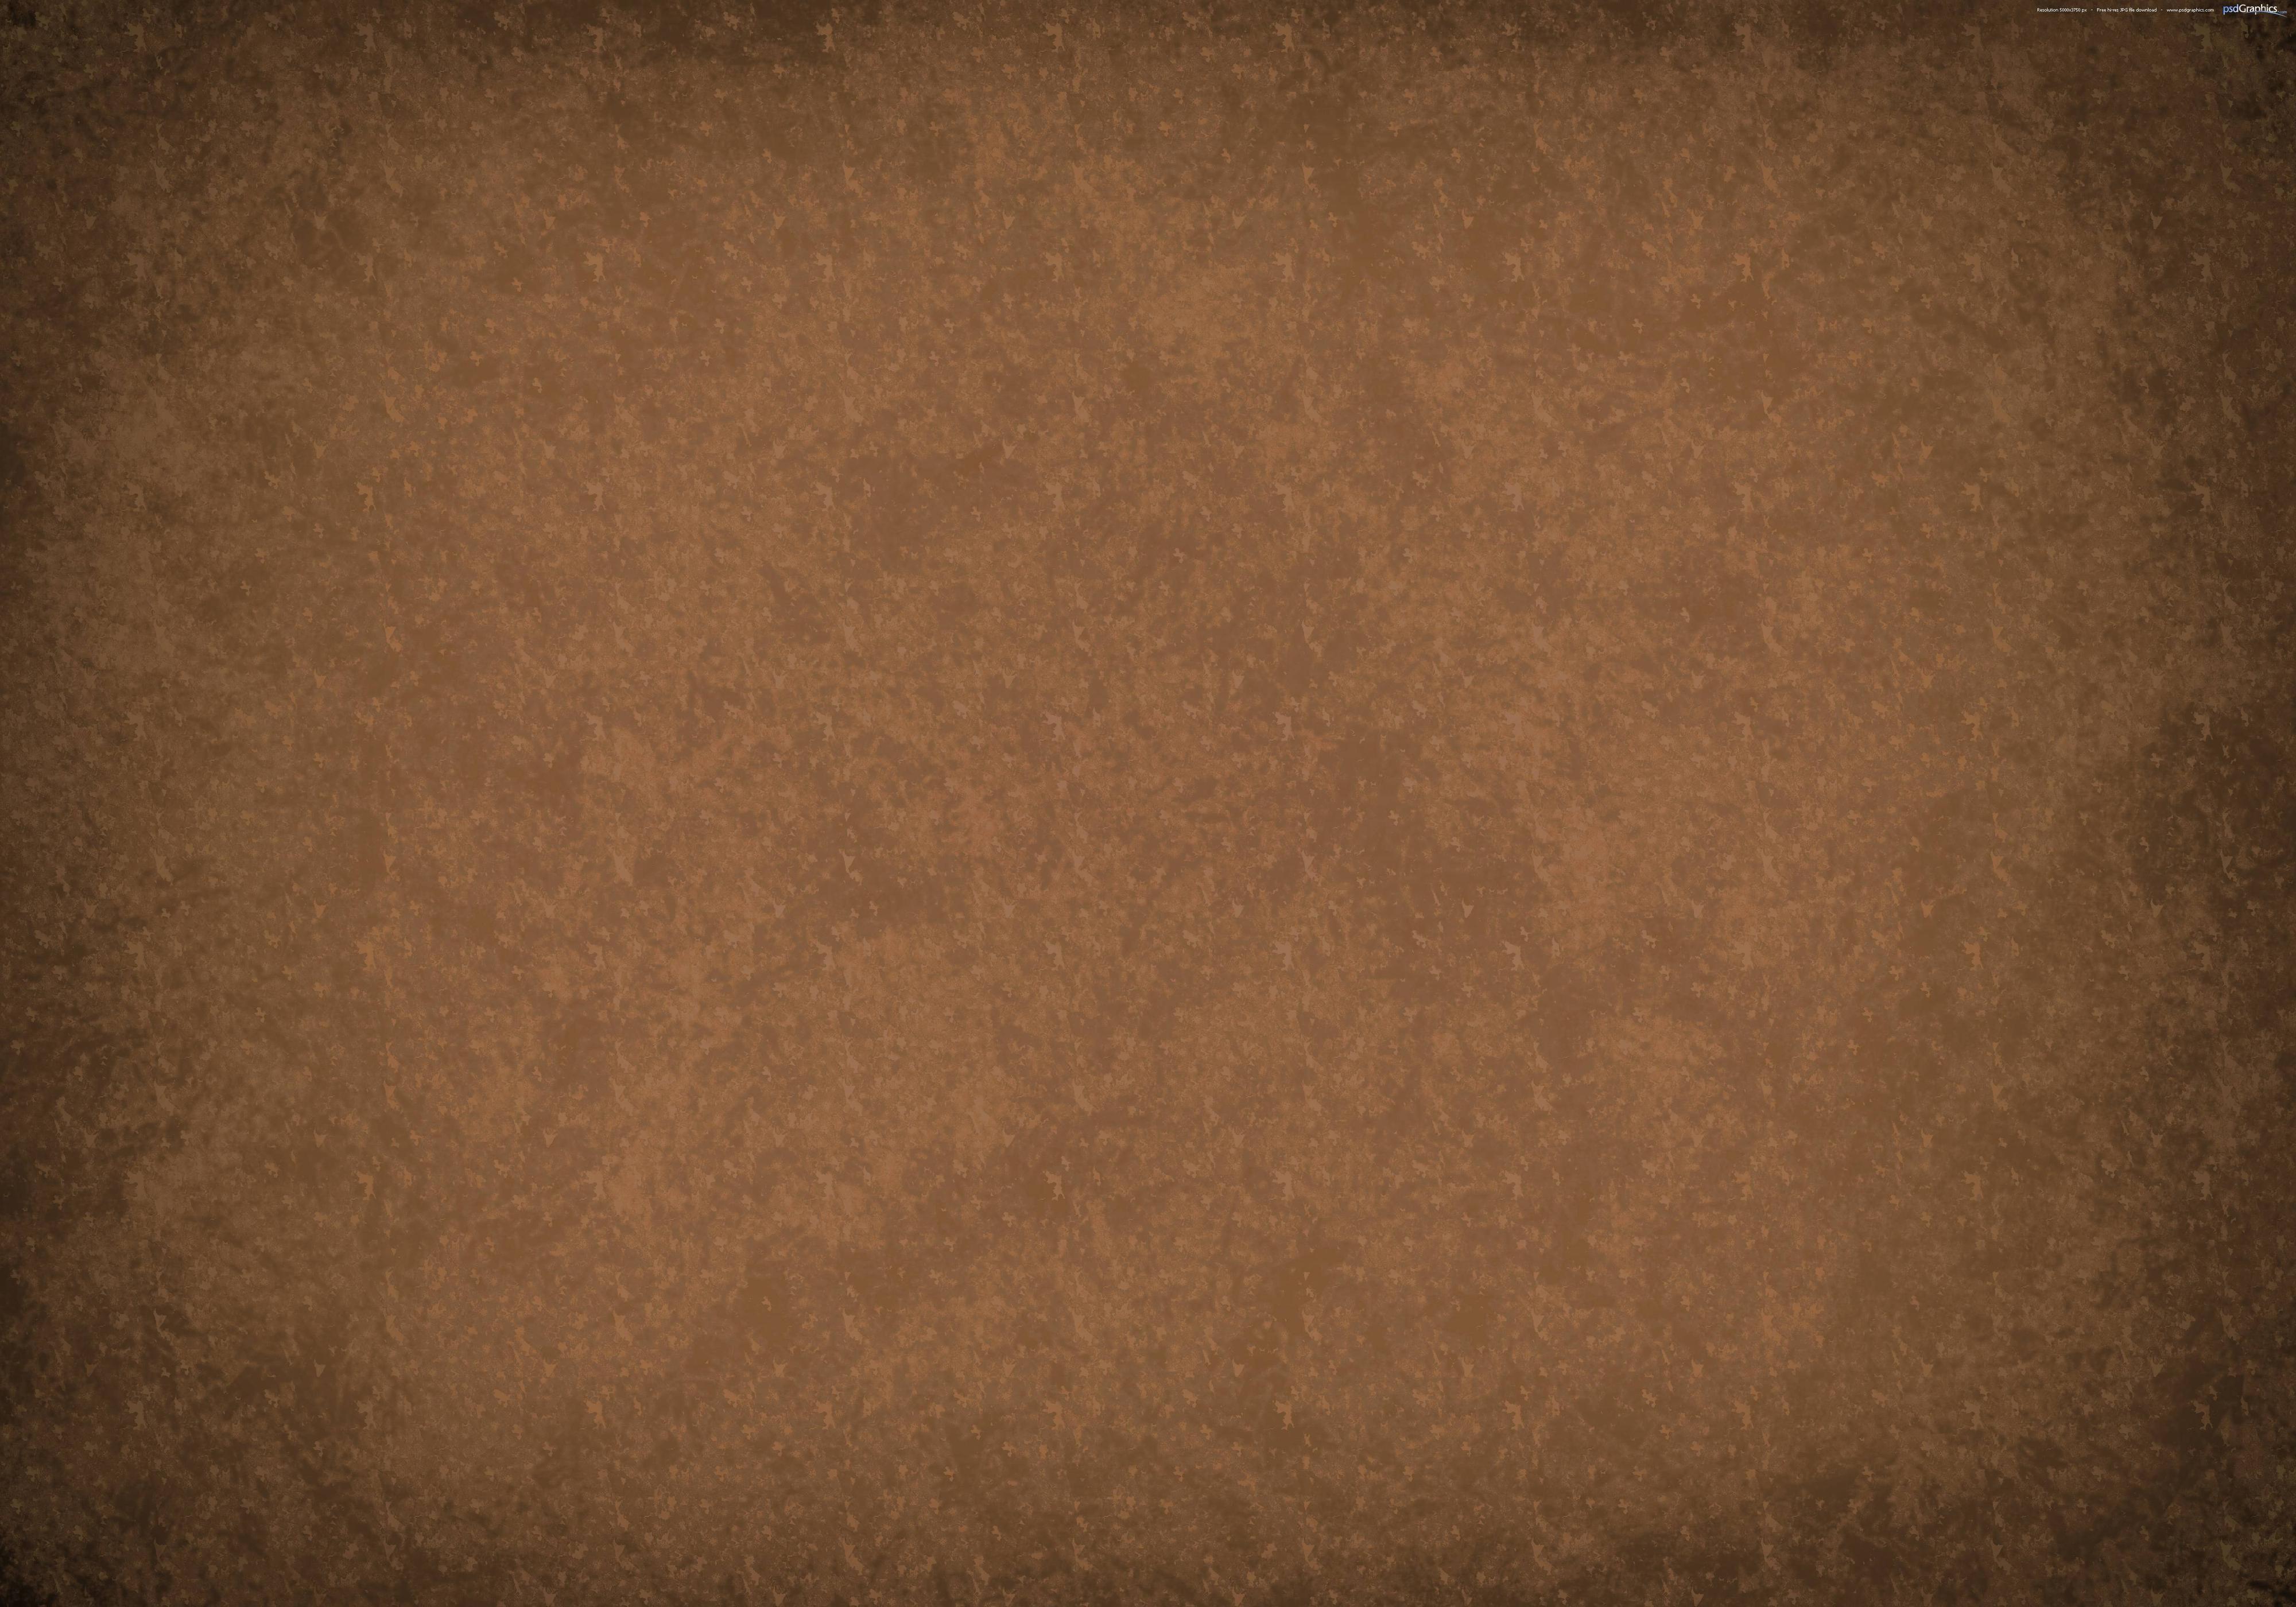 Red and brown grunge background